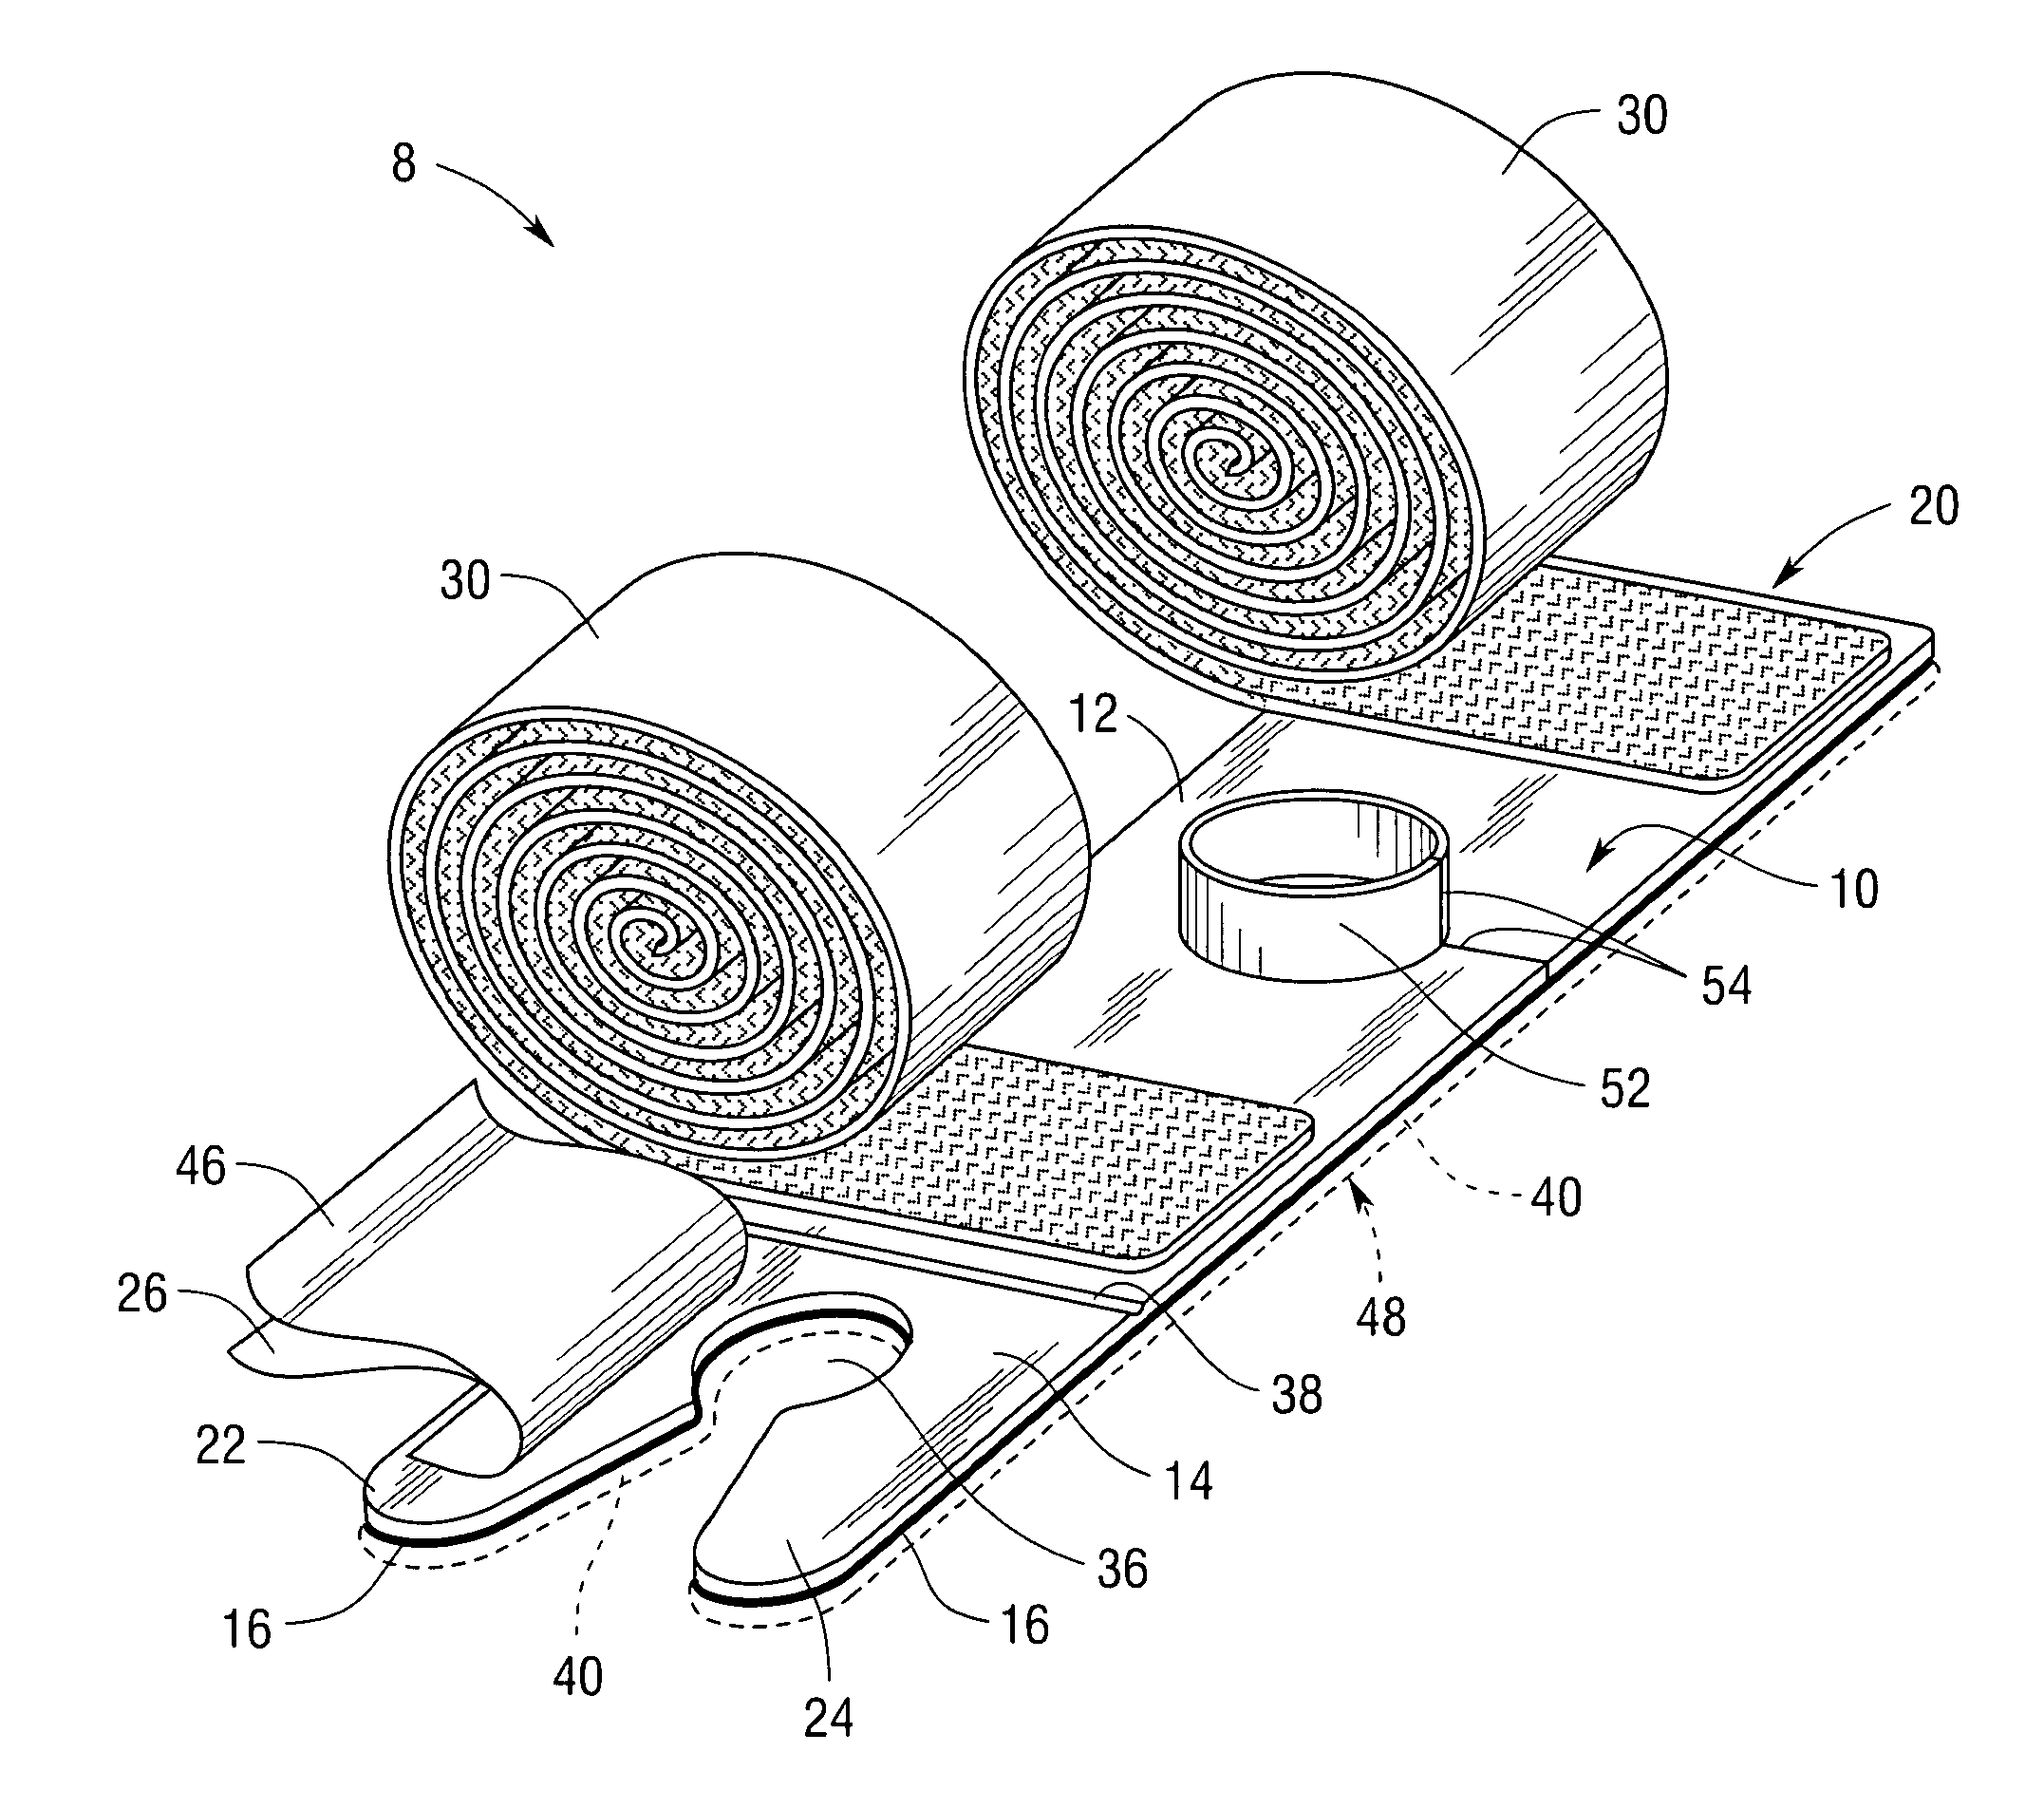 Medical appliance stabilization device and method for using same